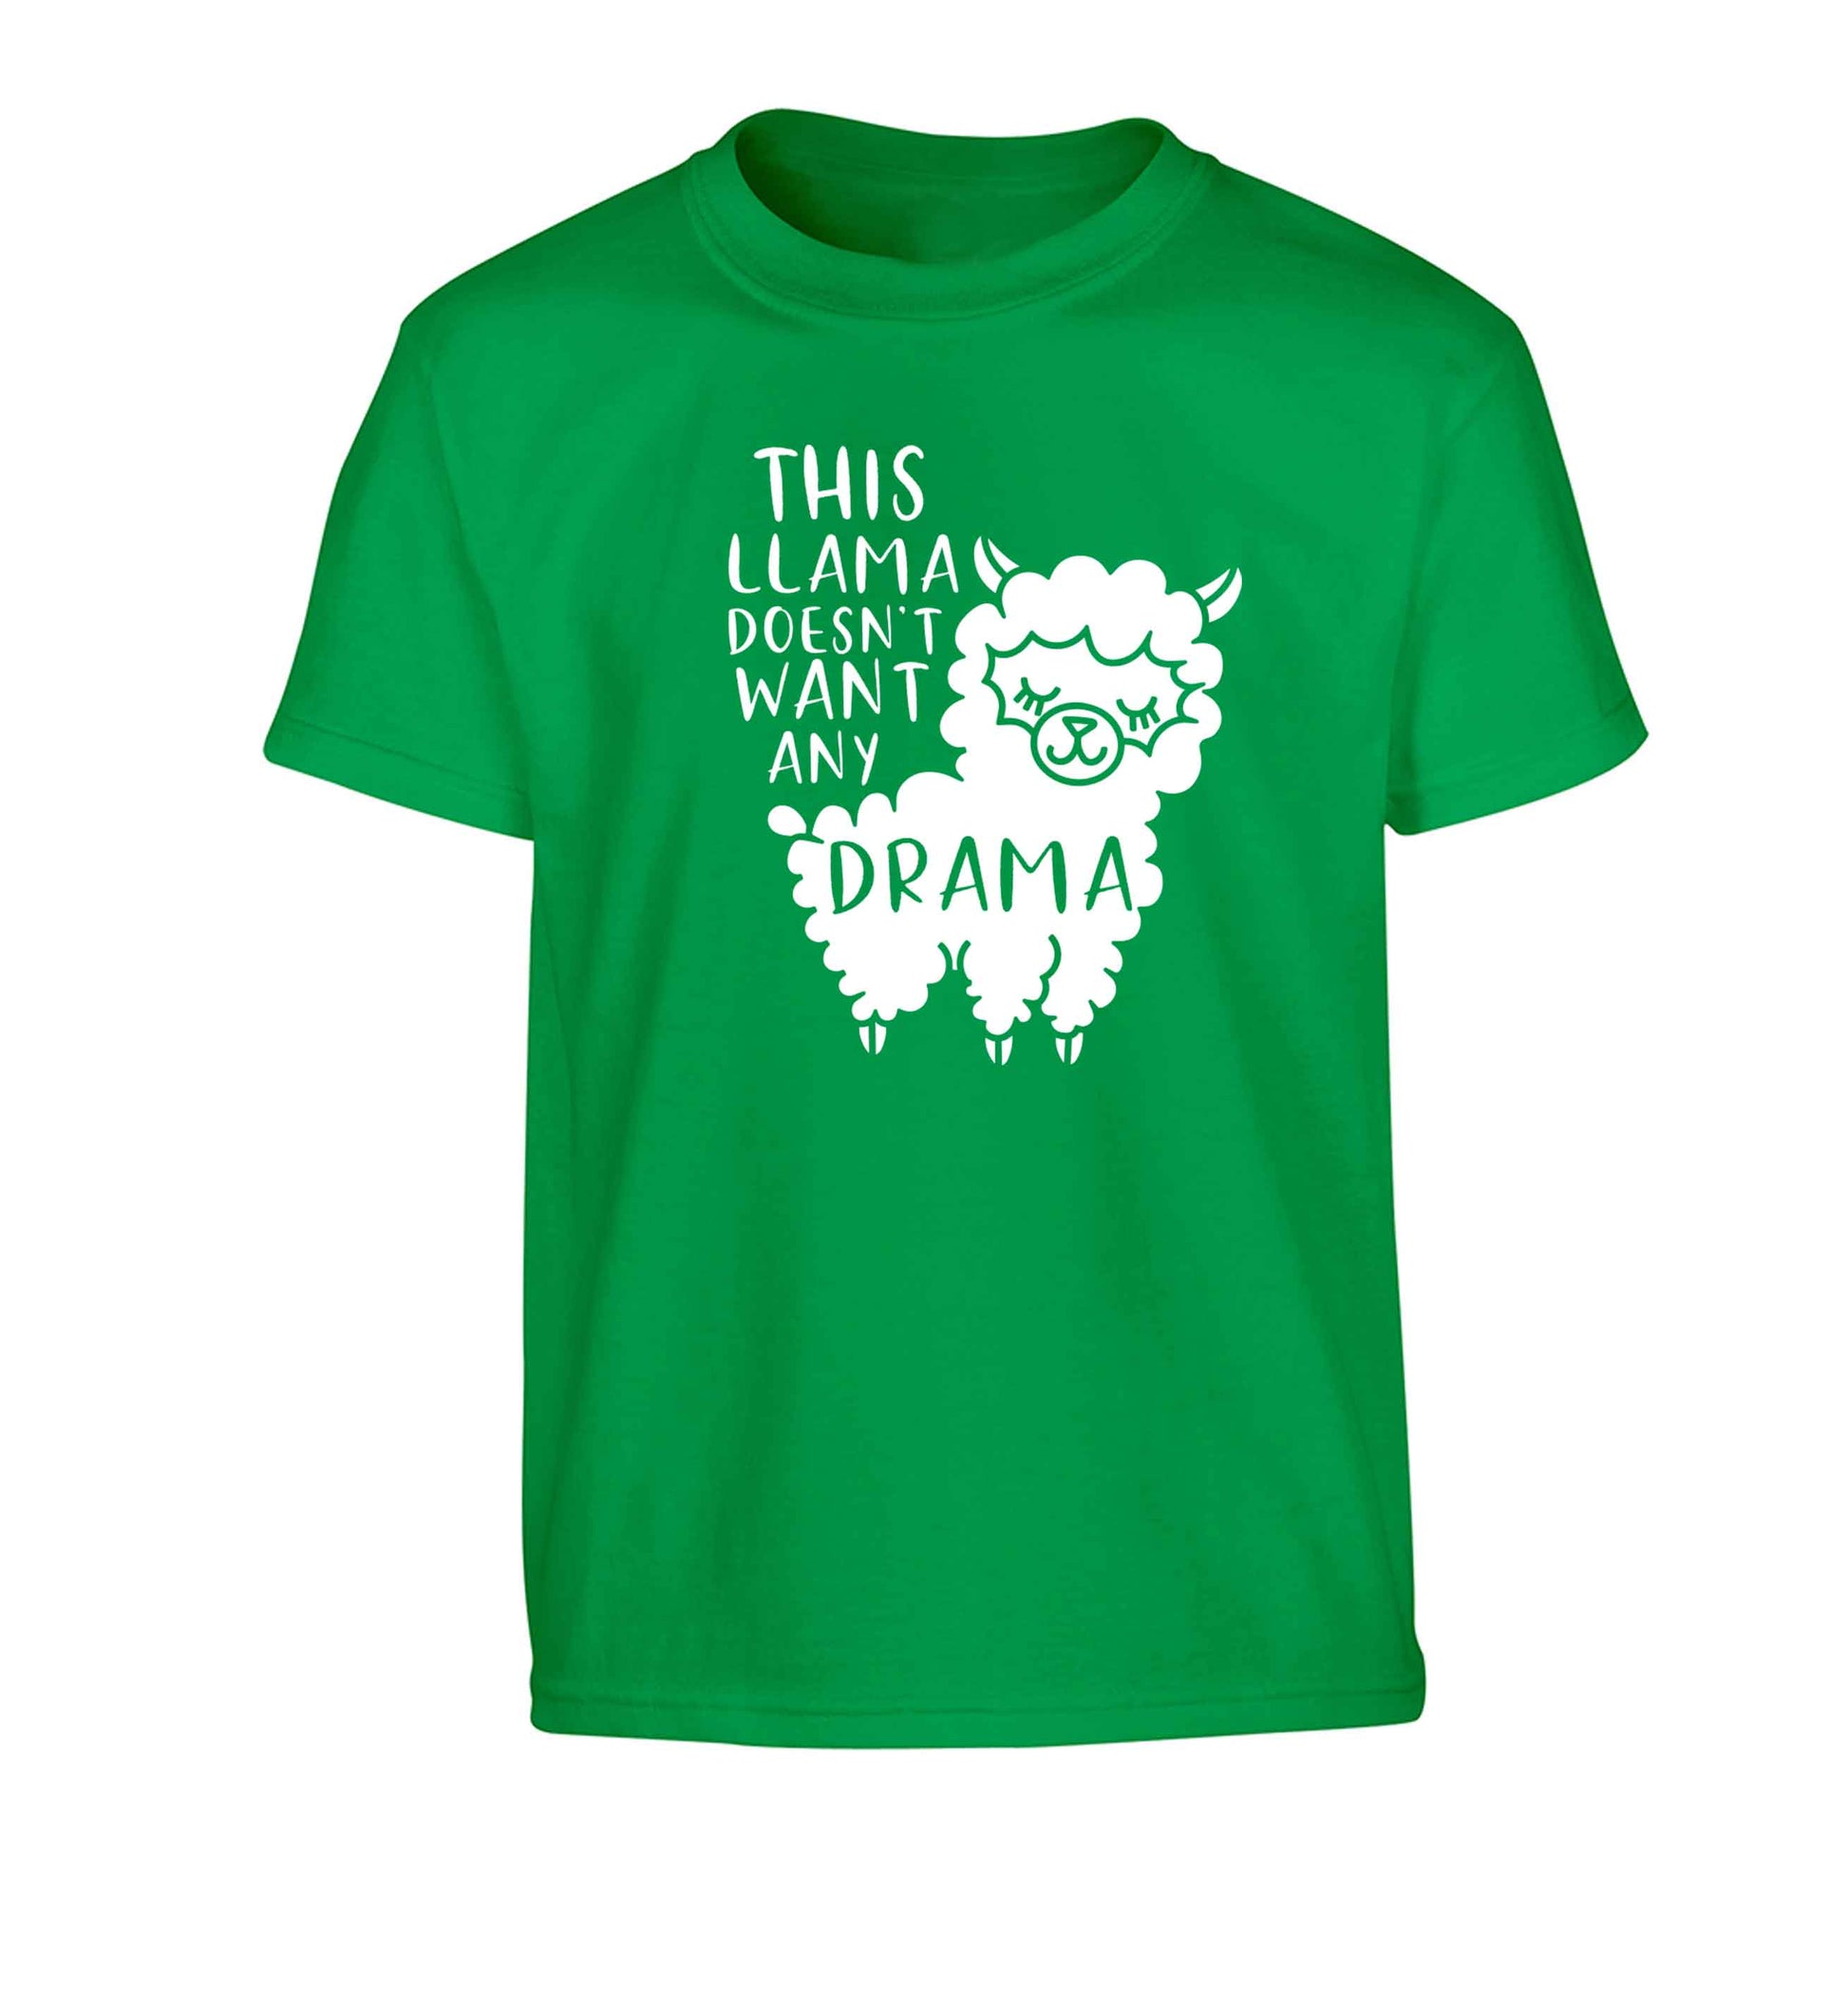 This Llama doesn't want any drama Children's green Tshirt 12-13 Years